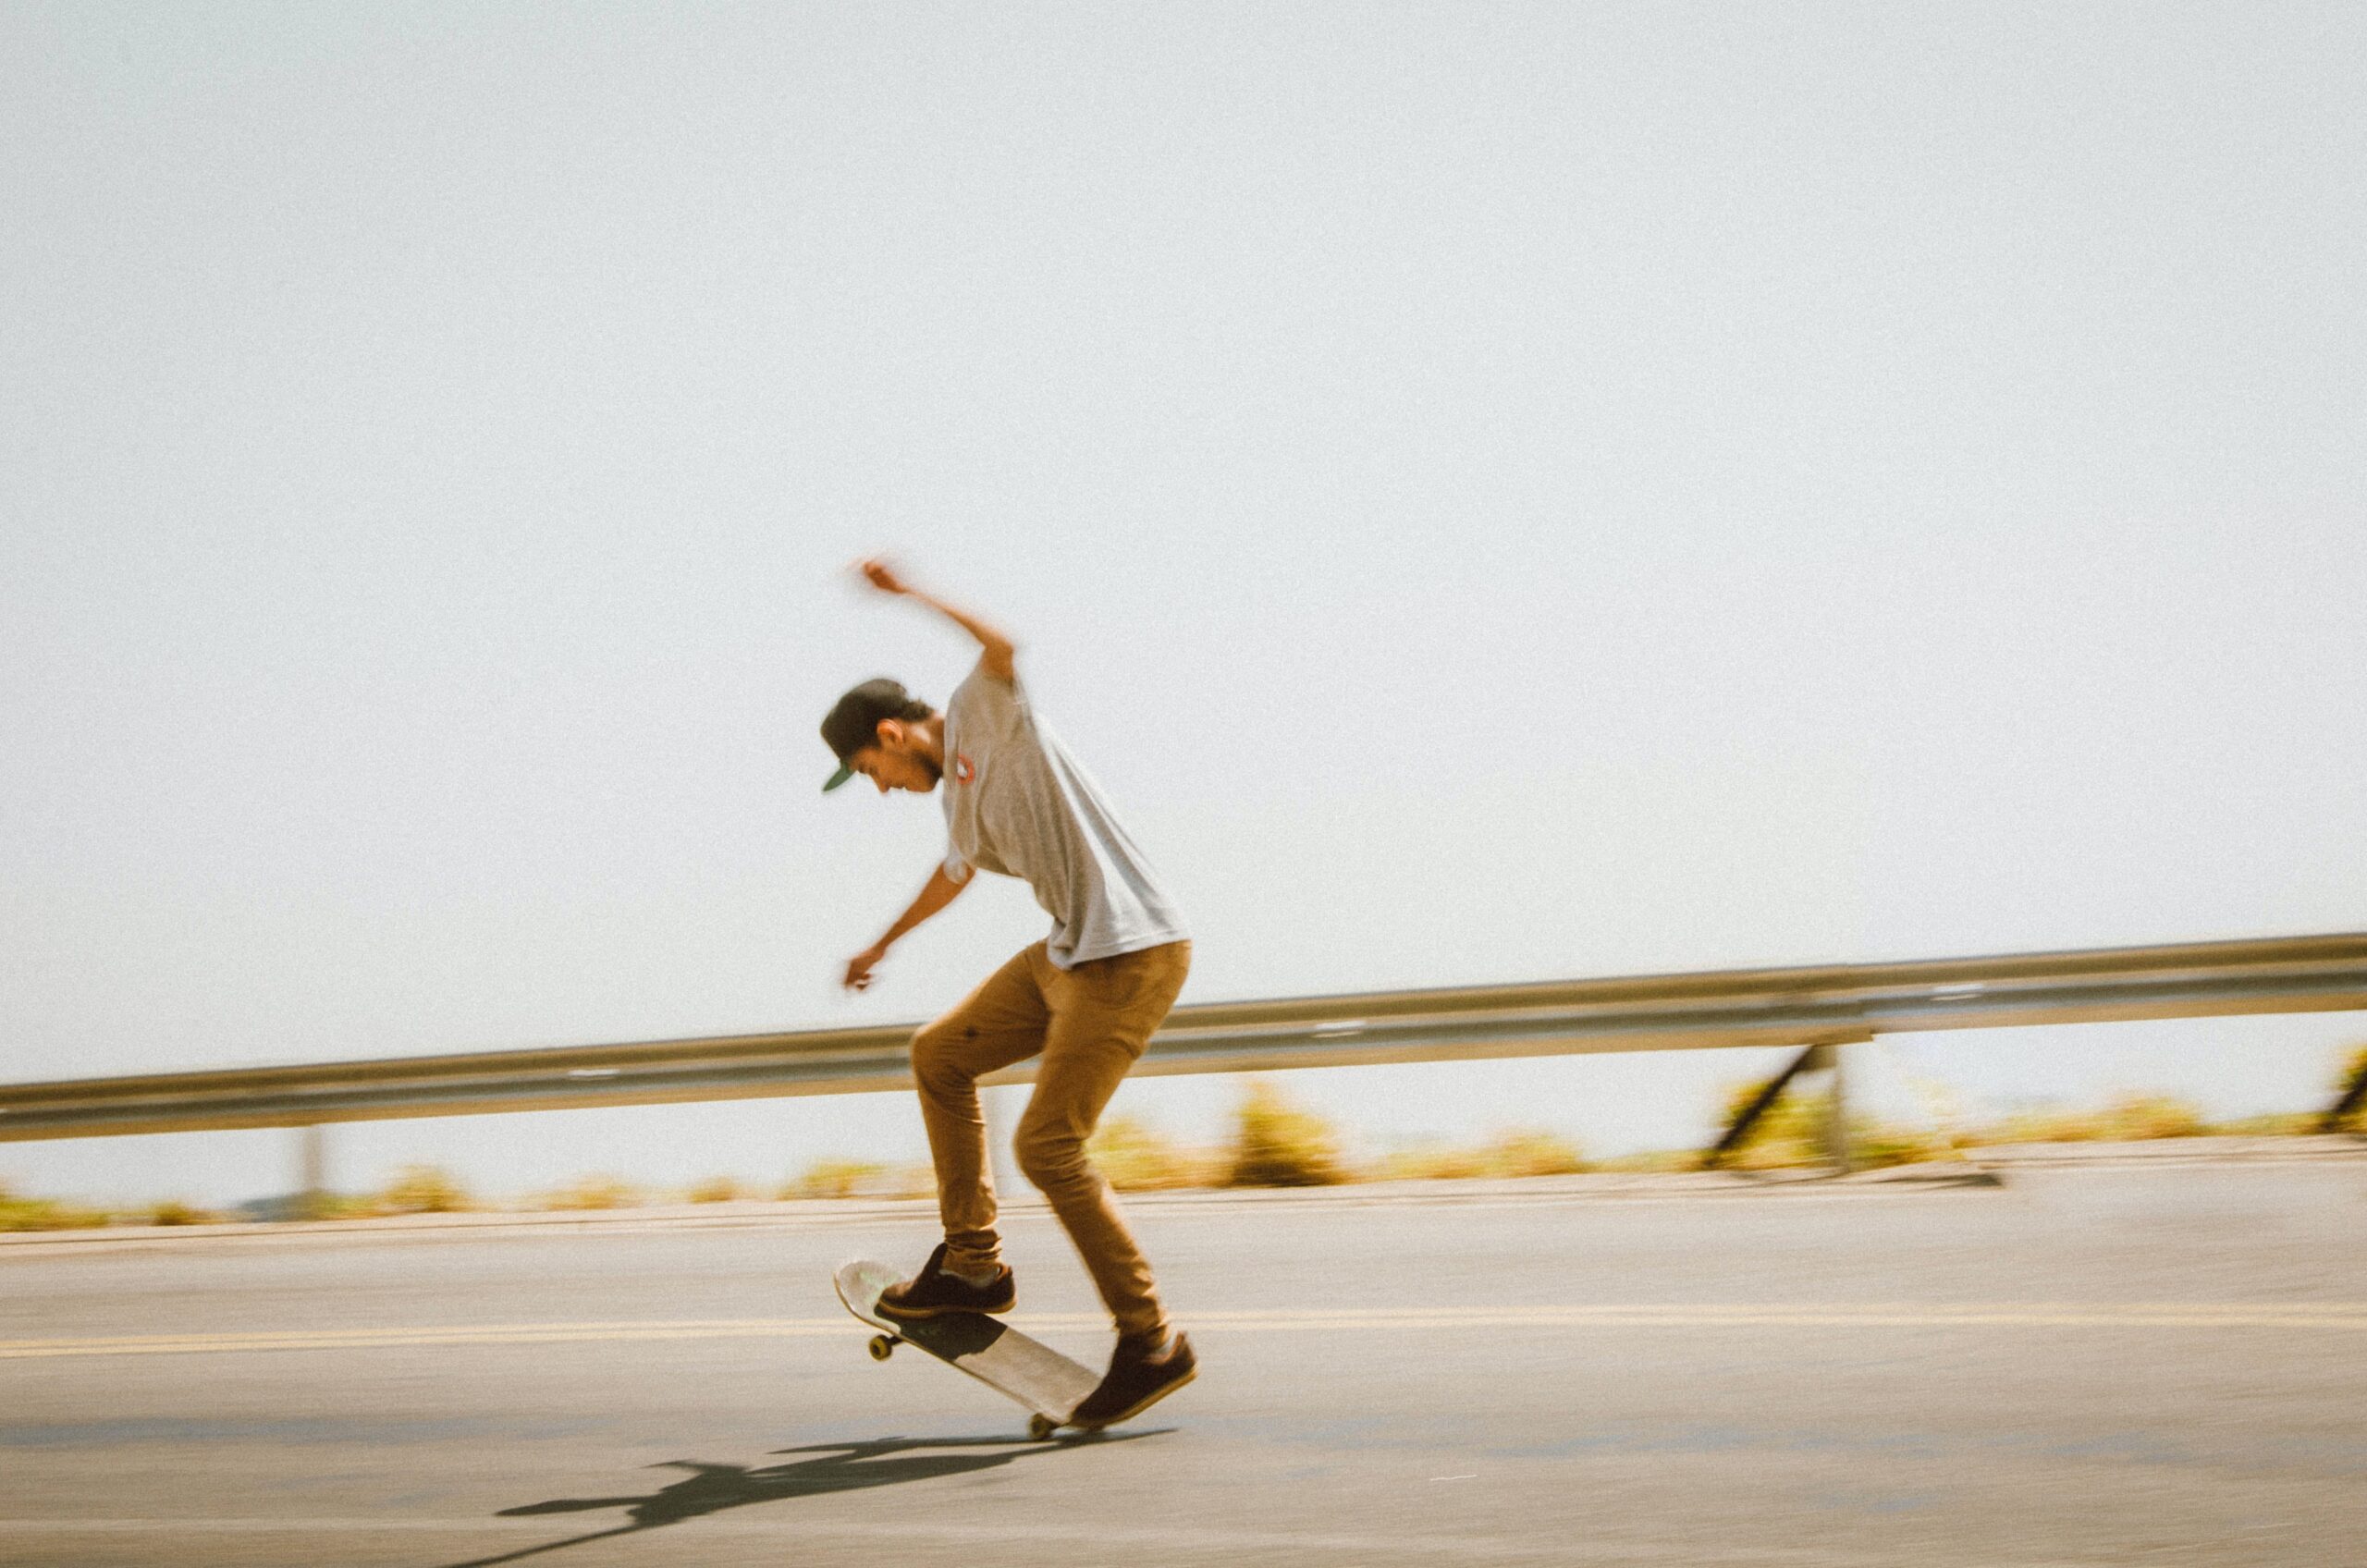 How Do You Engage With The History And Heritage Of Skateboarding For Inspiration?